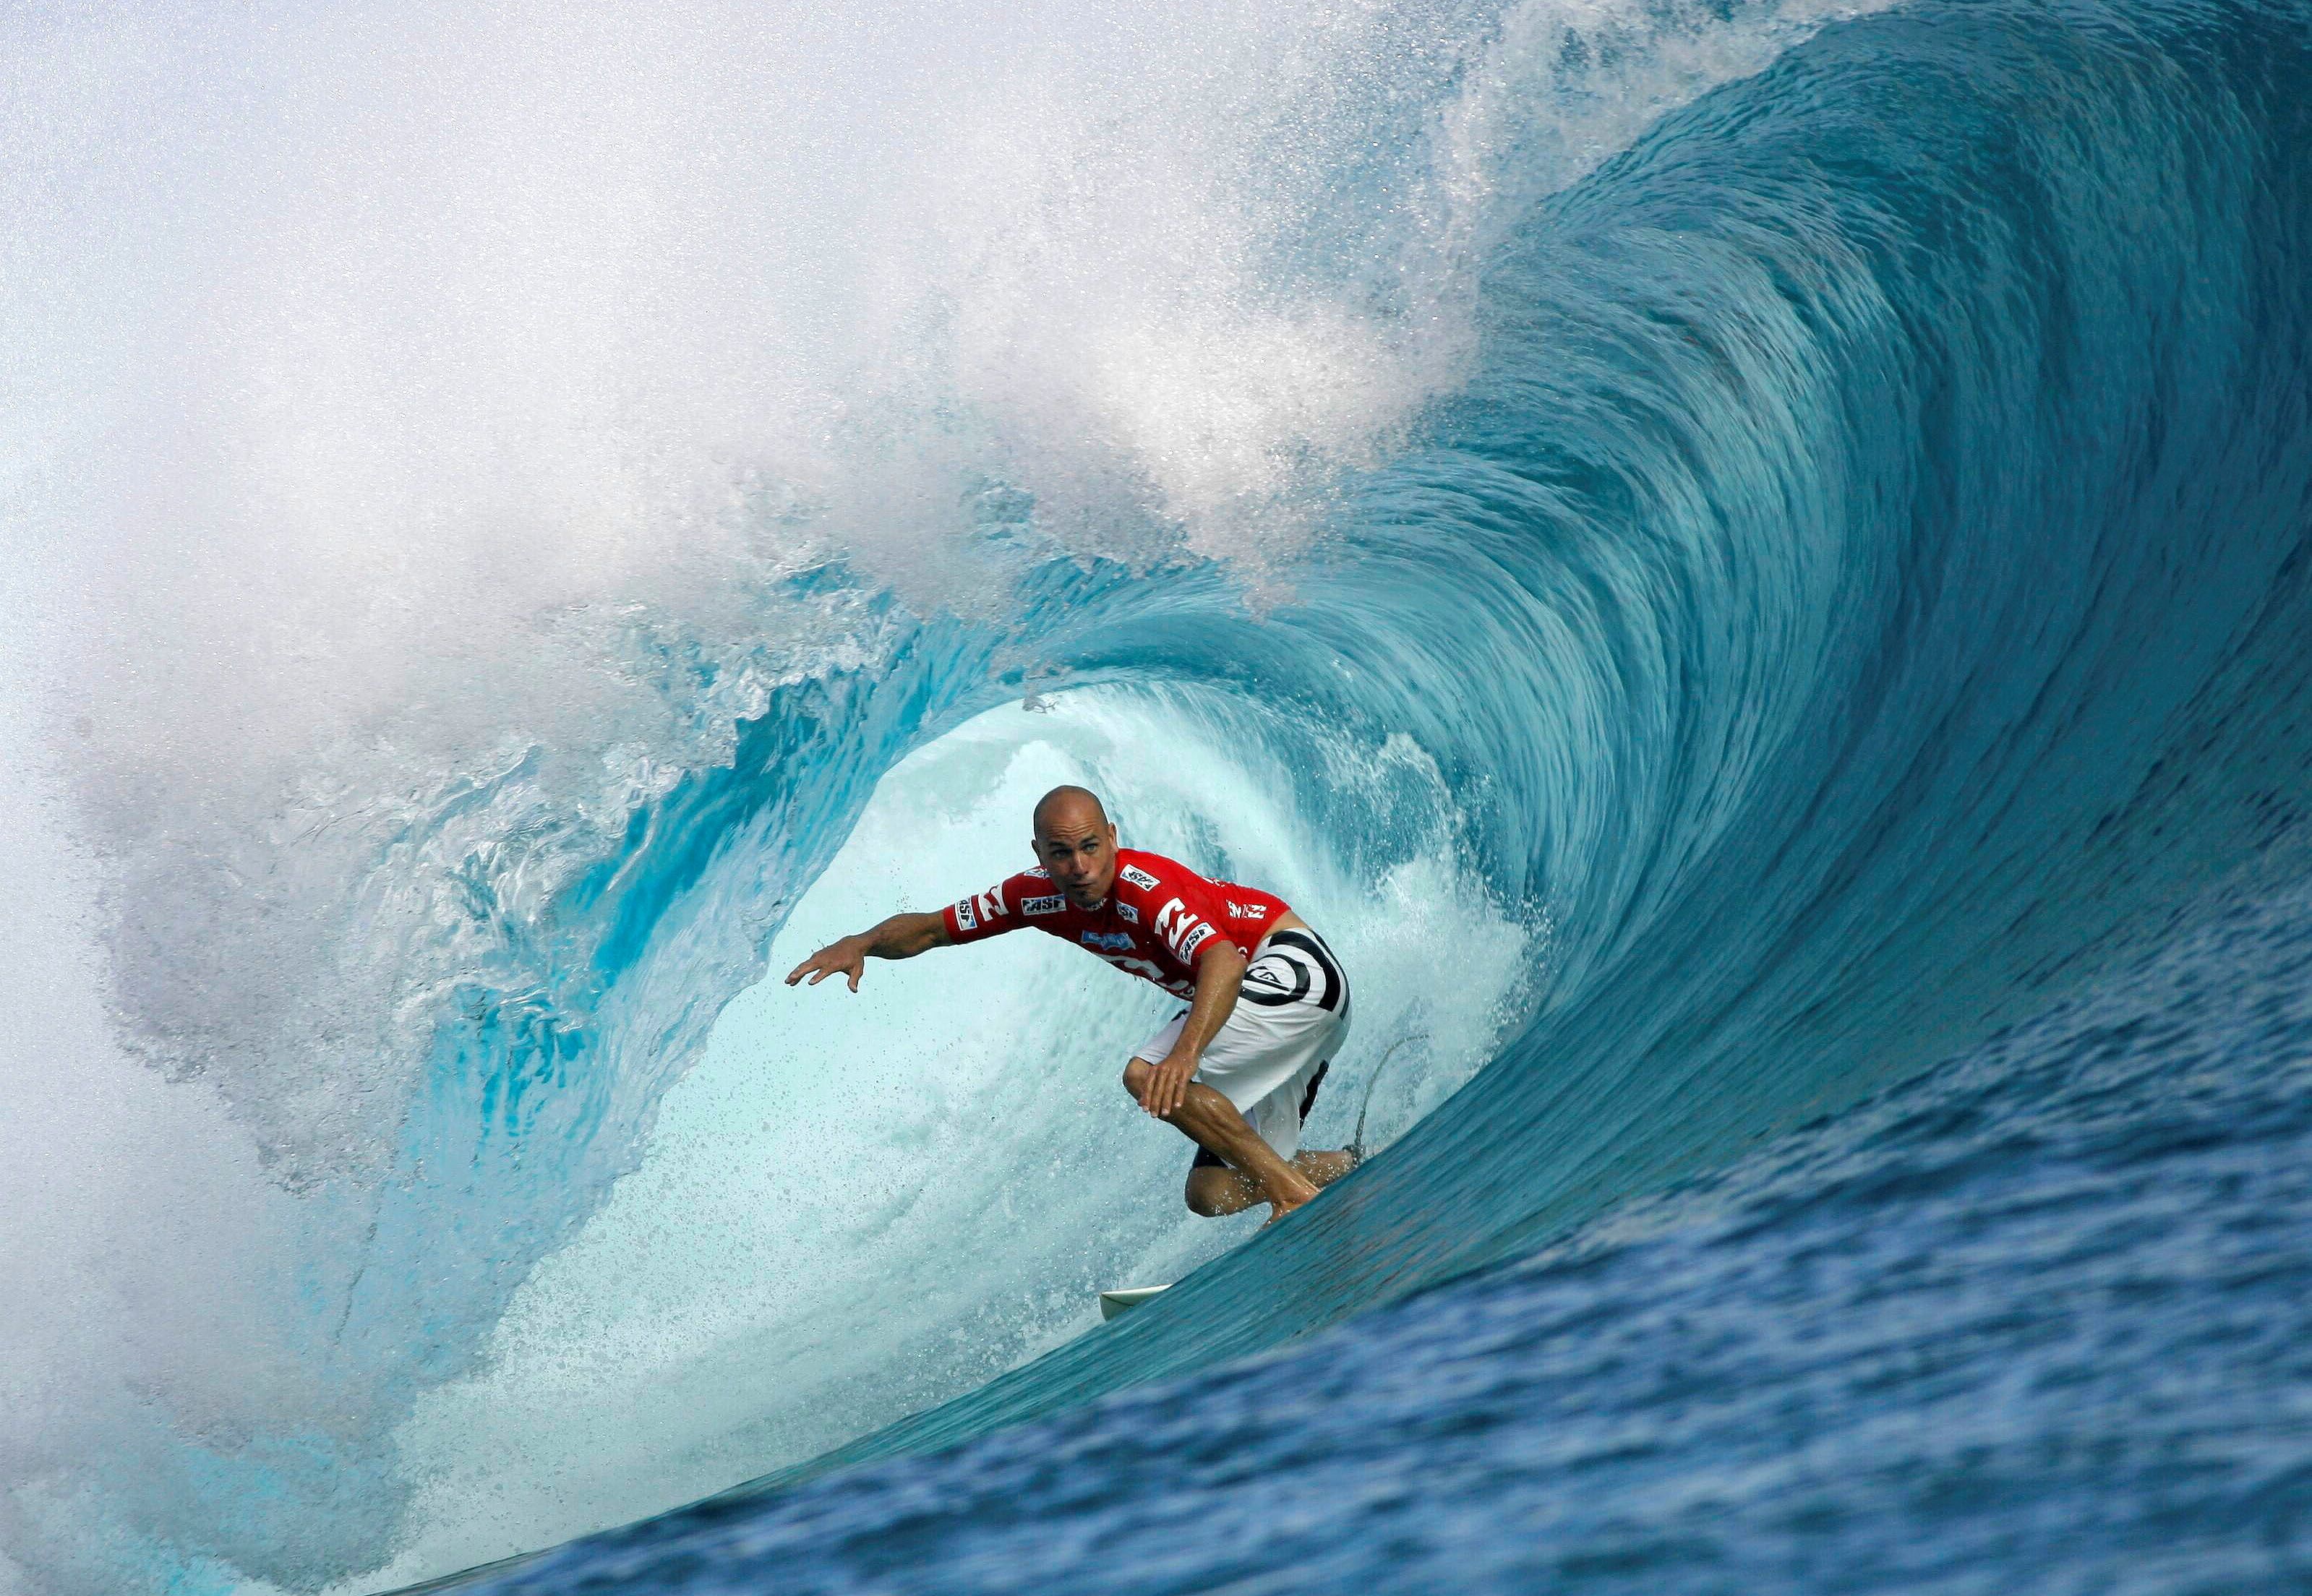 Surfer Slater of the U.S rides a wave during the third round of competition in the Billabong Pro surfing tournament on the legendary reef break in Teahupoo